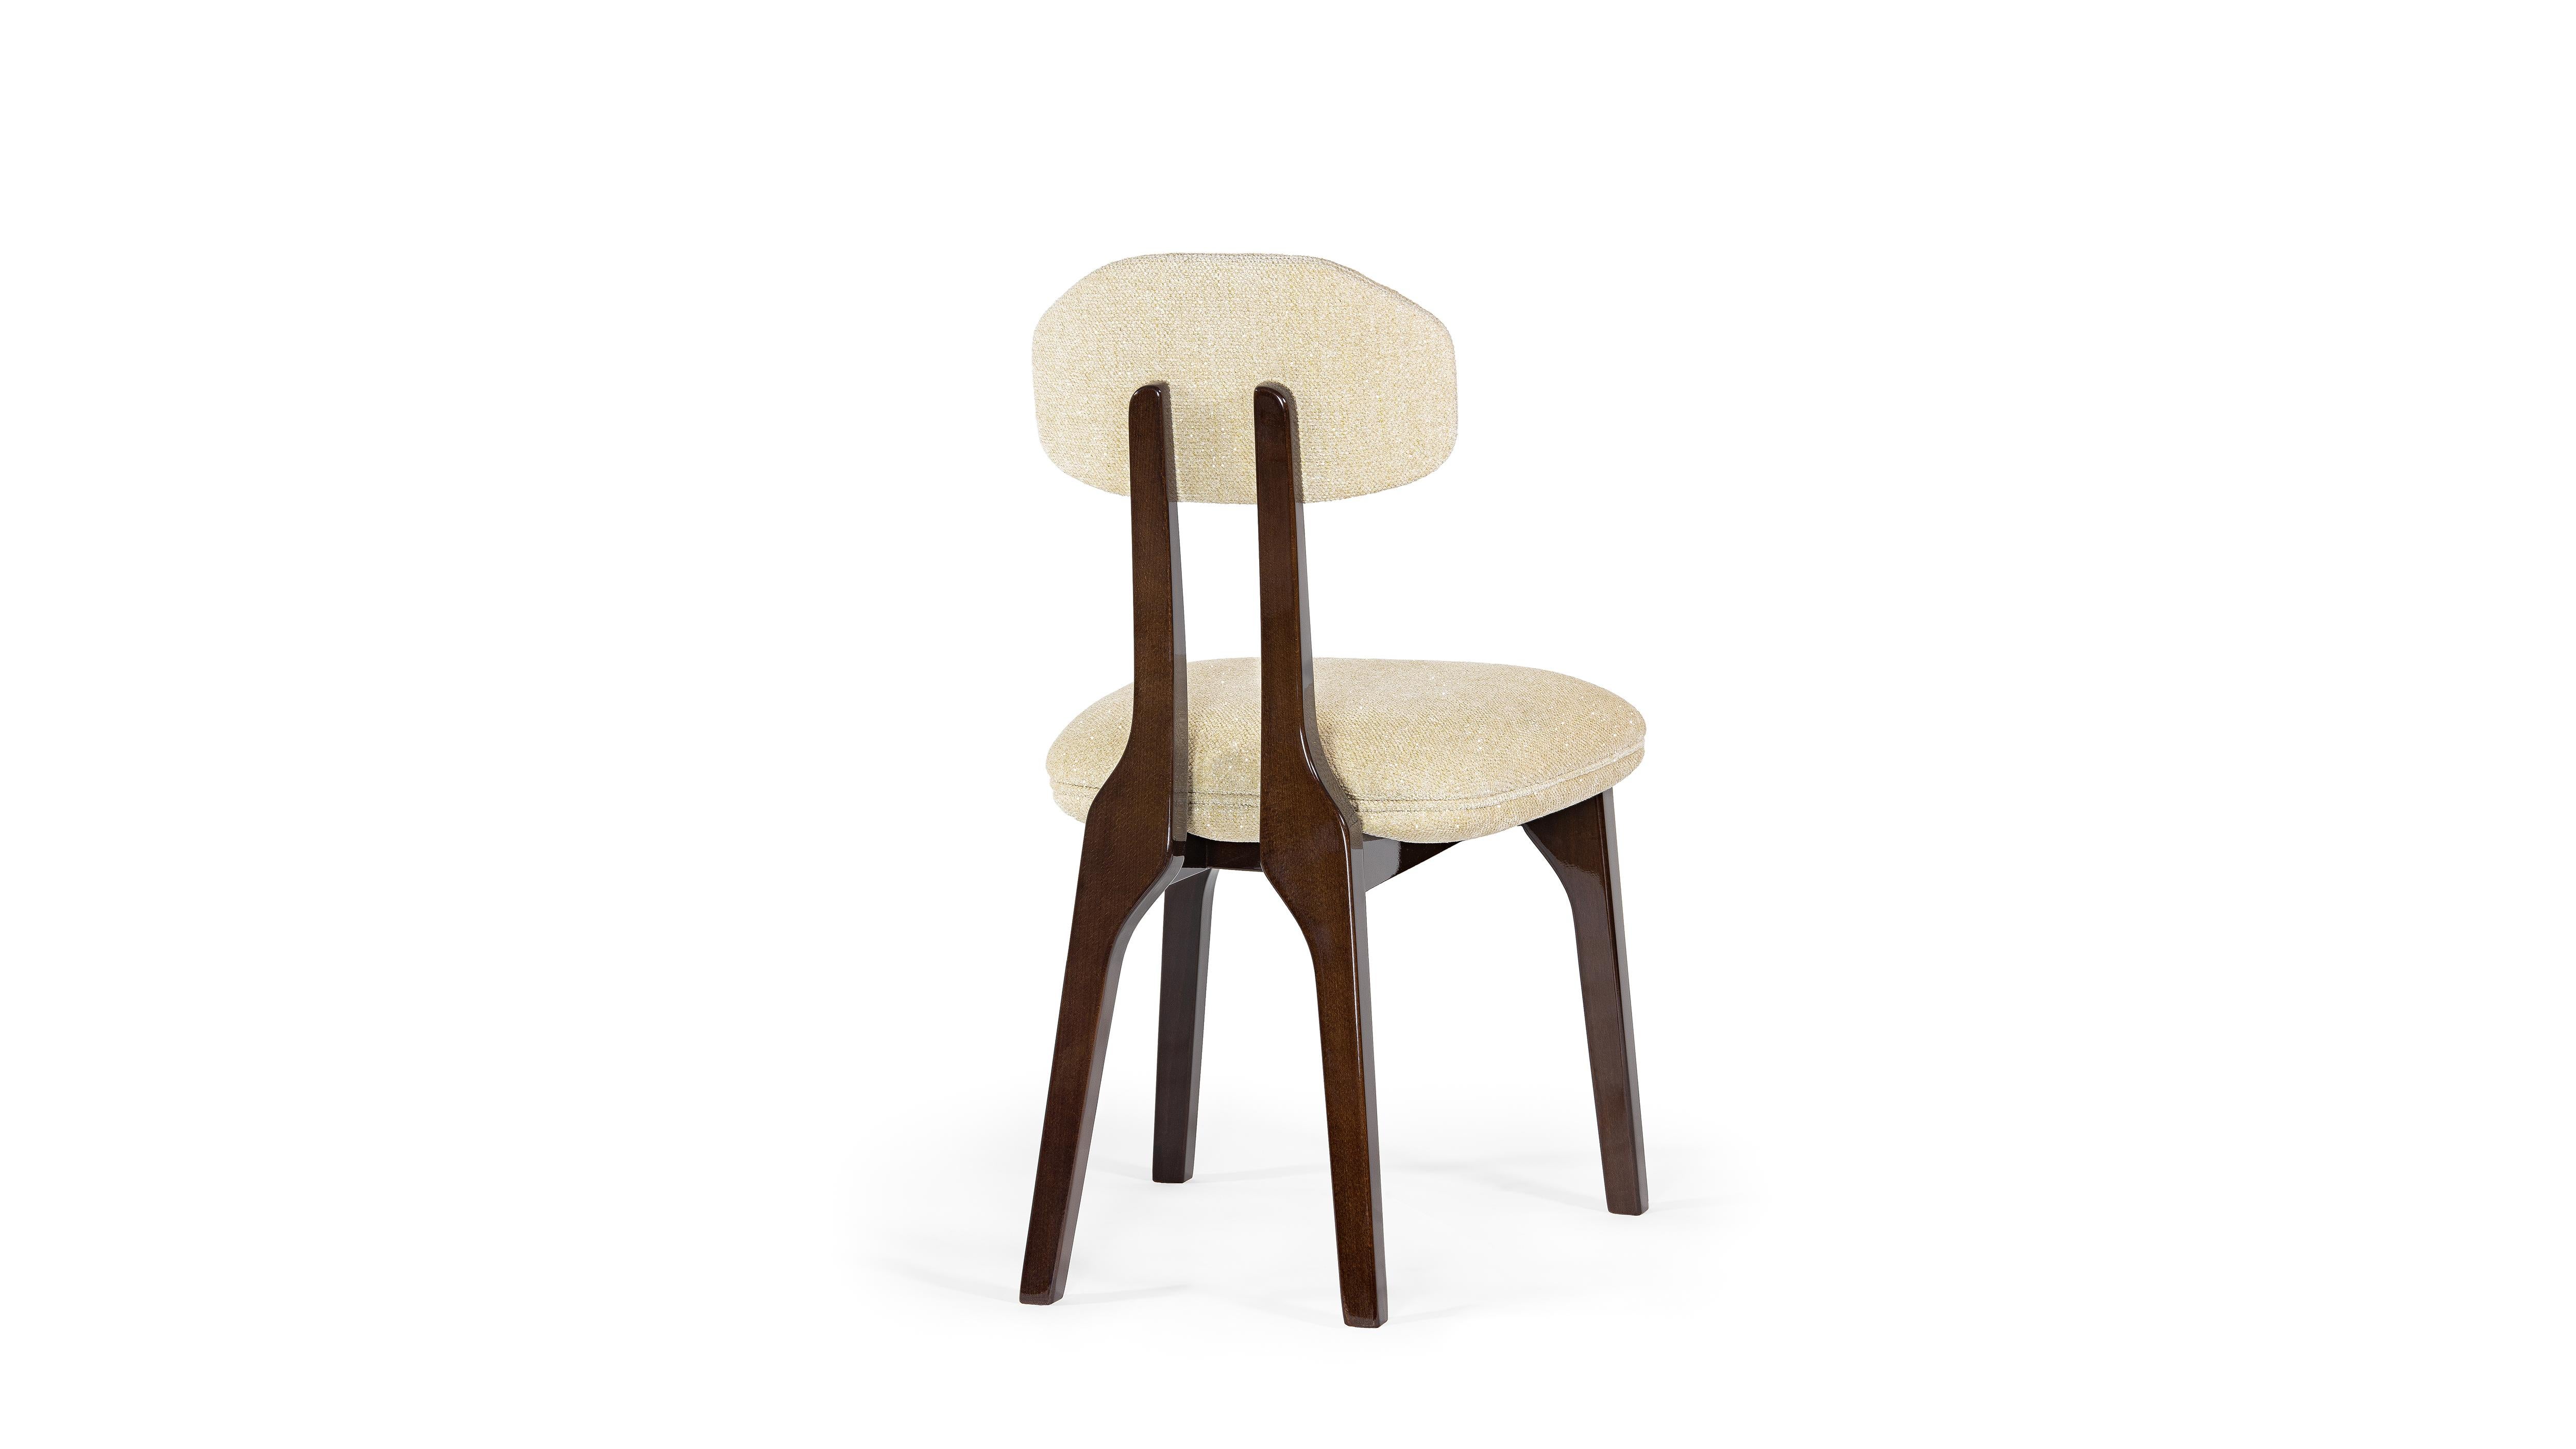 Portuguese Silhouette Dining Chair by InsidherLand For Sale